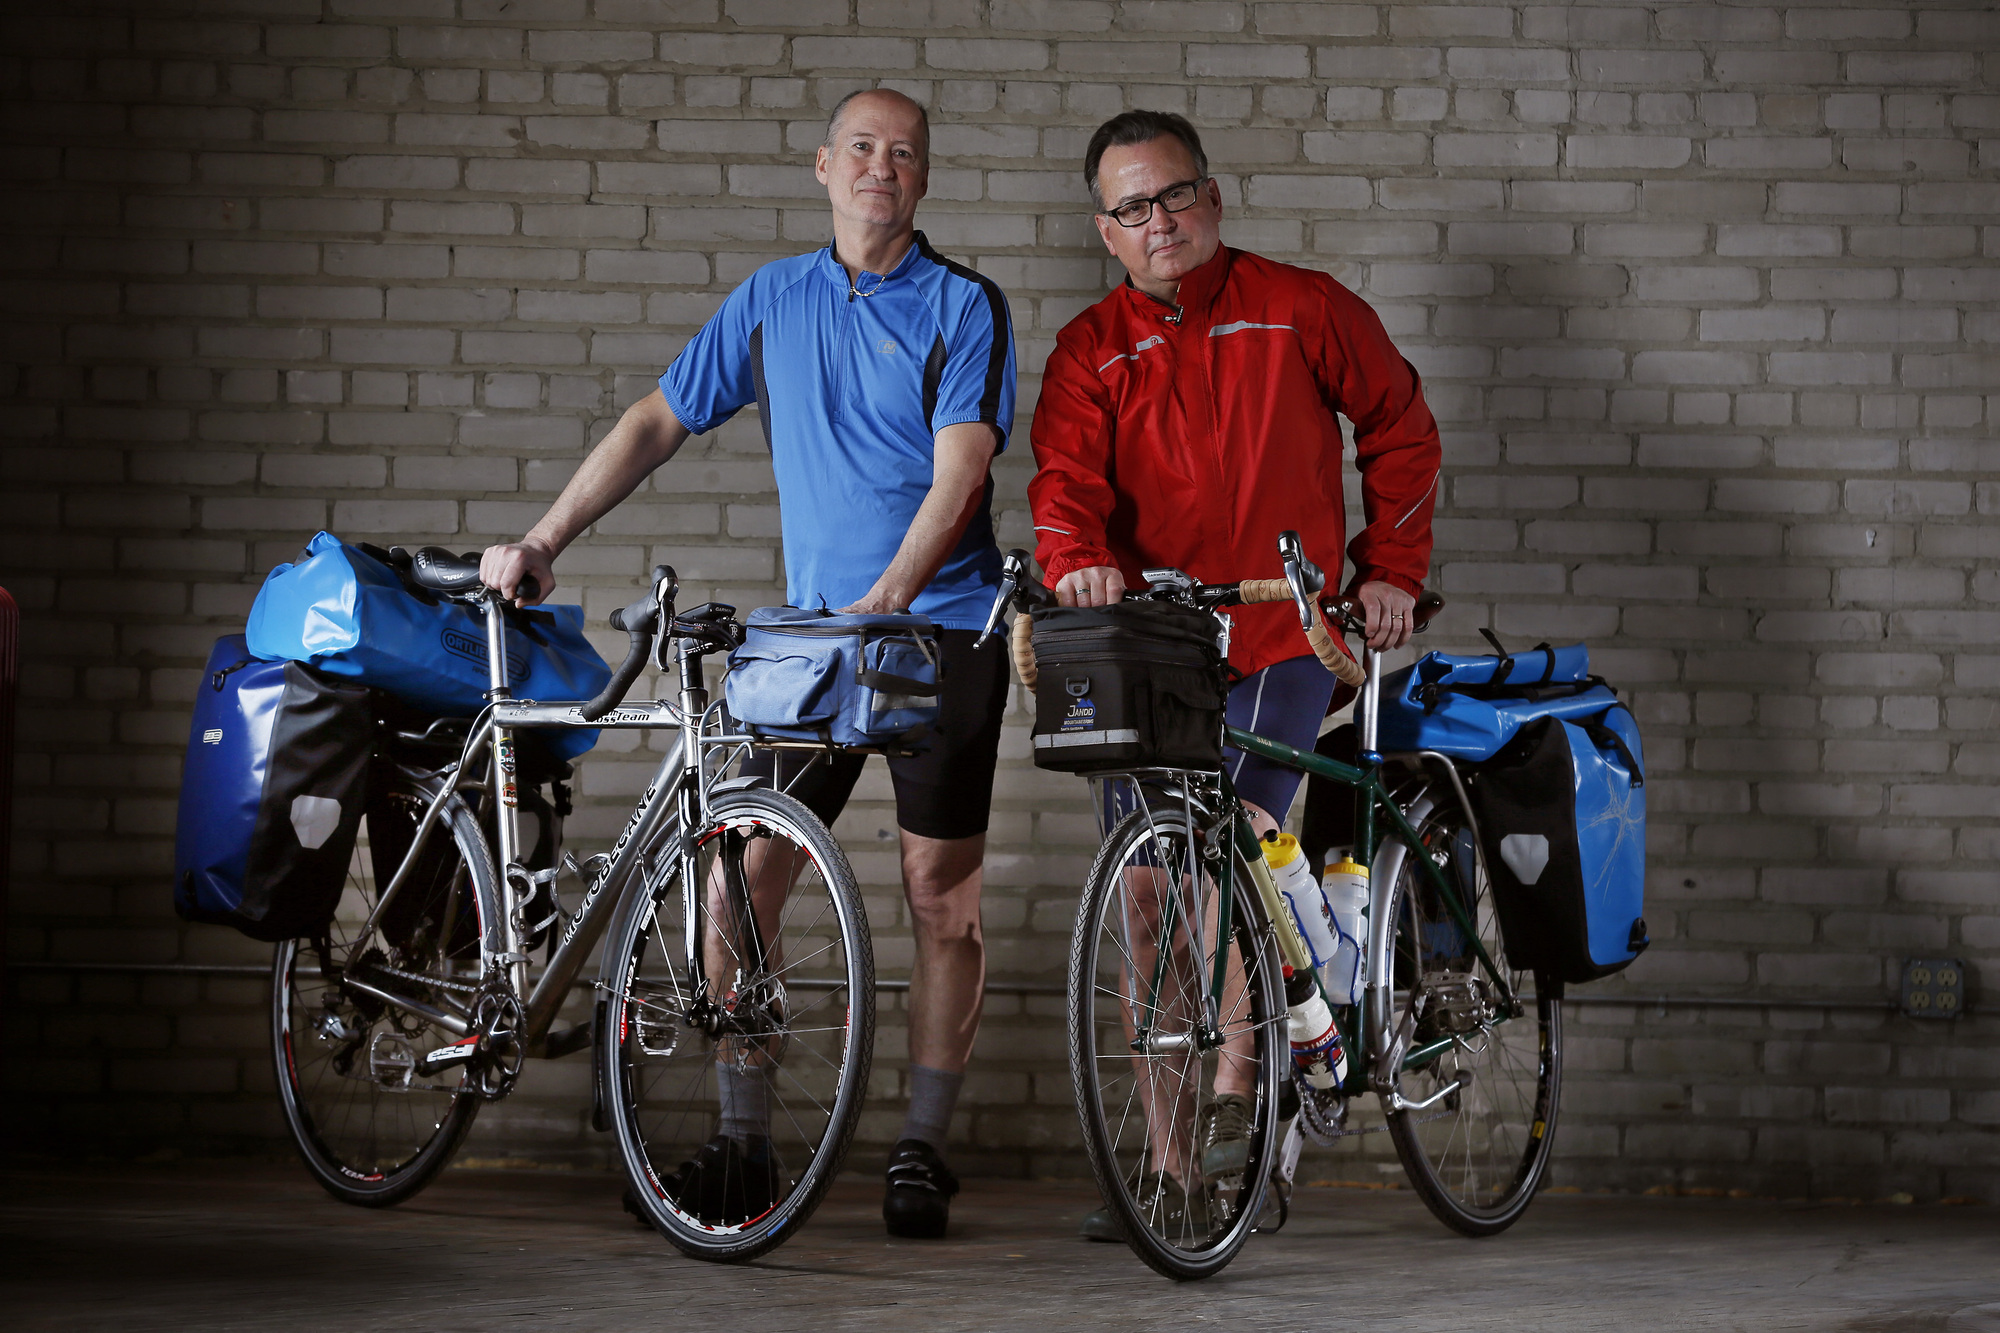 Will Fifer left and Tony Brown will ride there bicycles across America, they posed for a photo February 25, 2015 in Minneapolis.